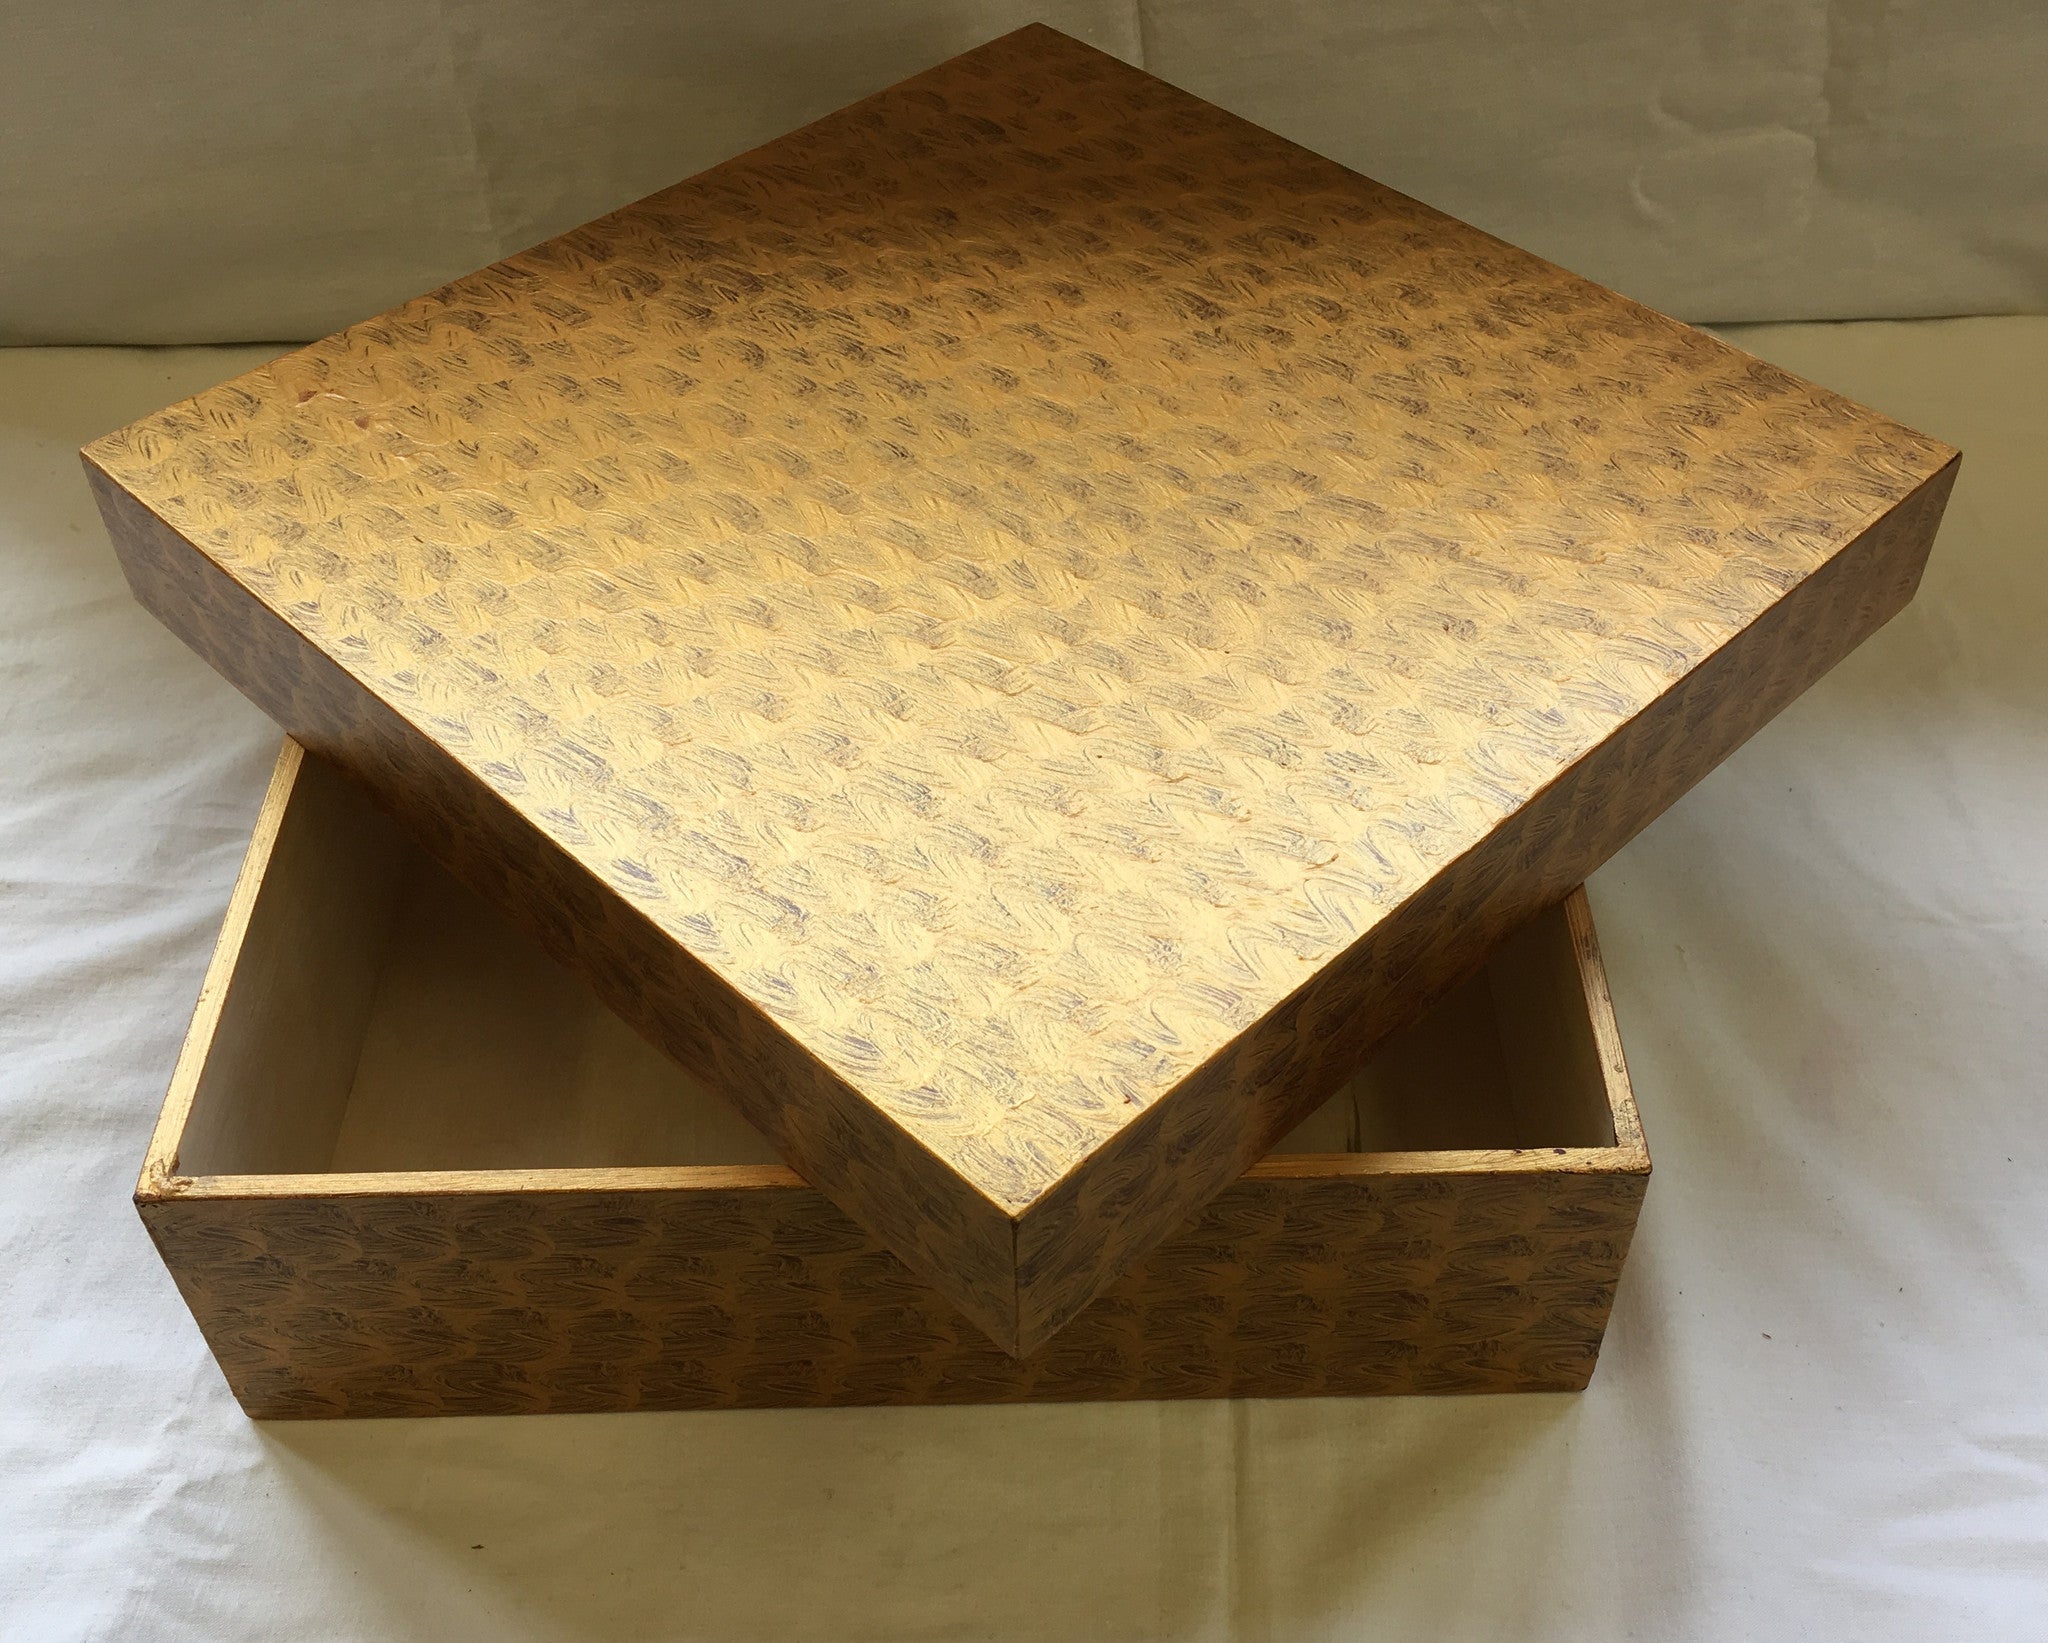 P13 - Distressed Gold Parable Box